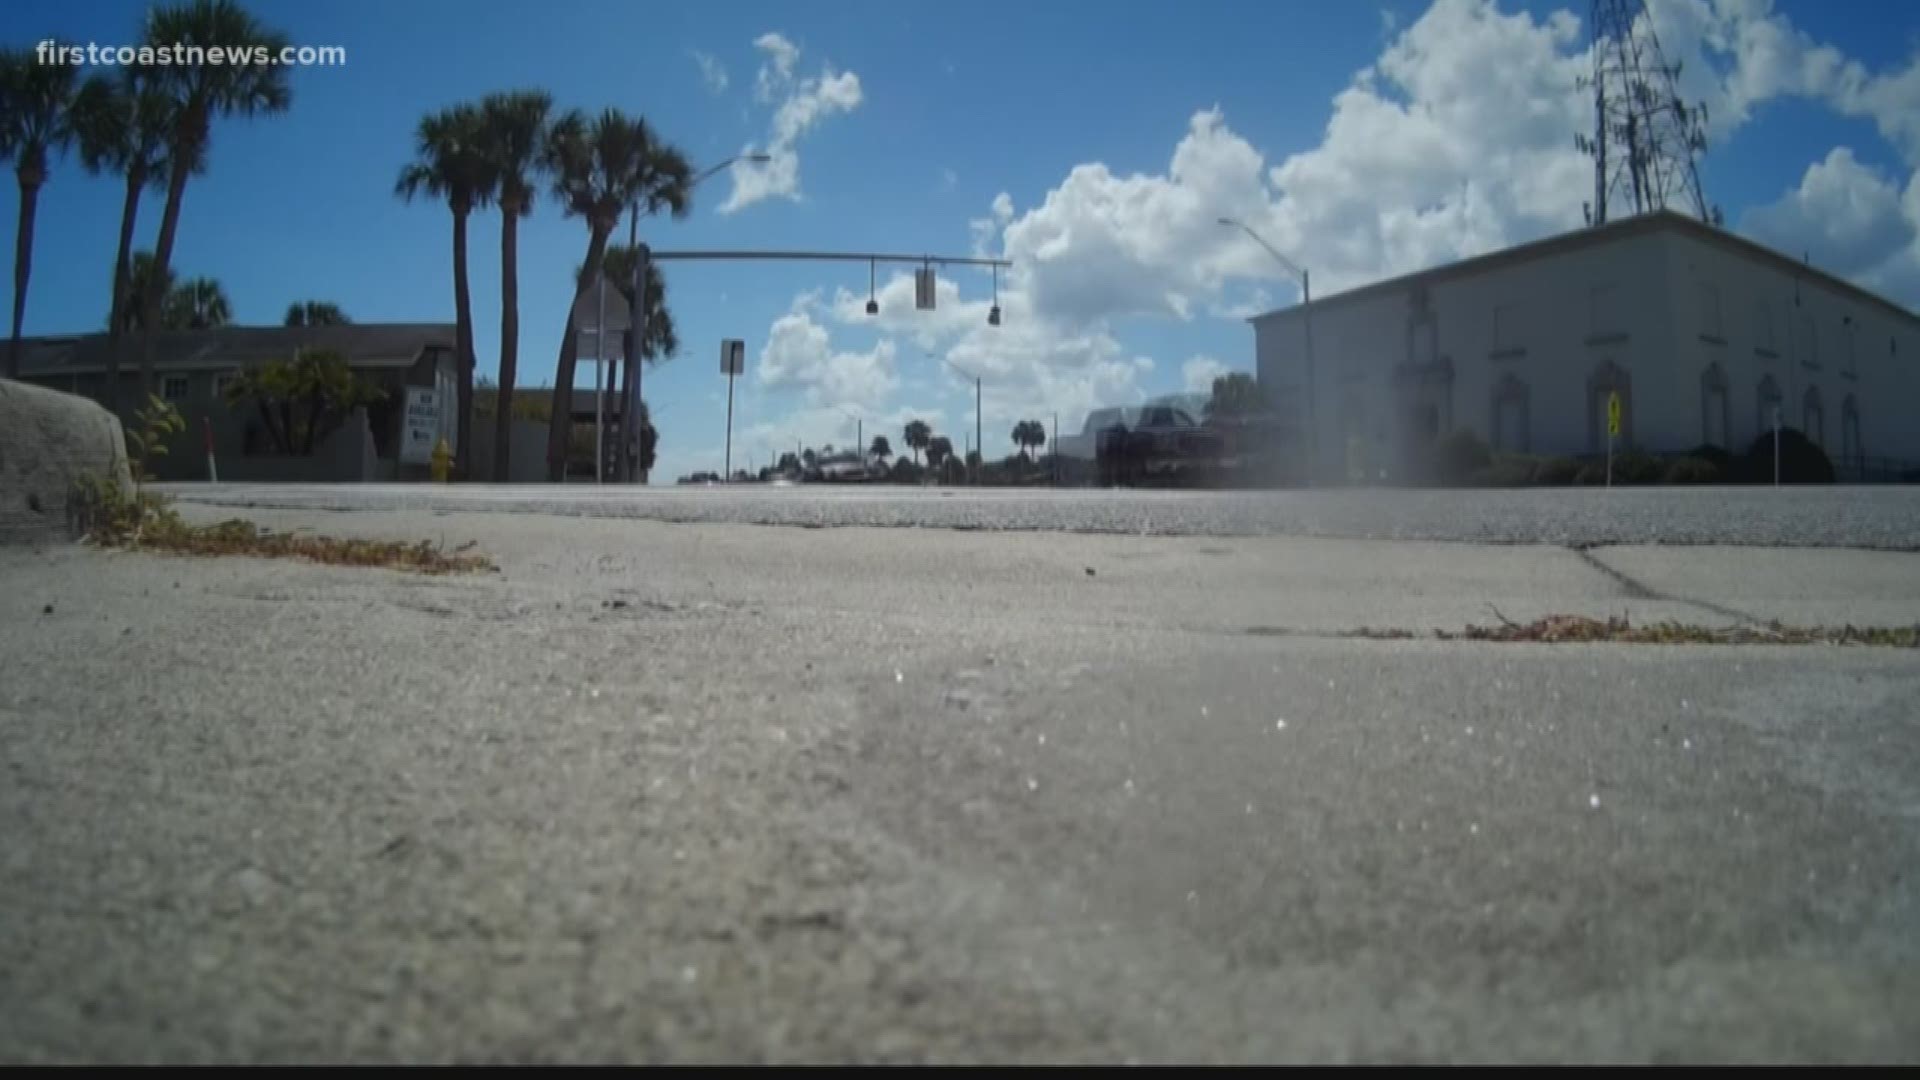 As a local teenager recovers after being hit by a car near Fletcher Middle School Wednesday evening, Jacksonville Beach Police are urging safety on the beaches? busiest road.